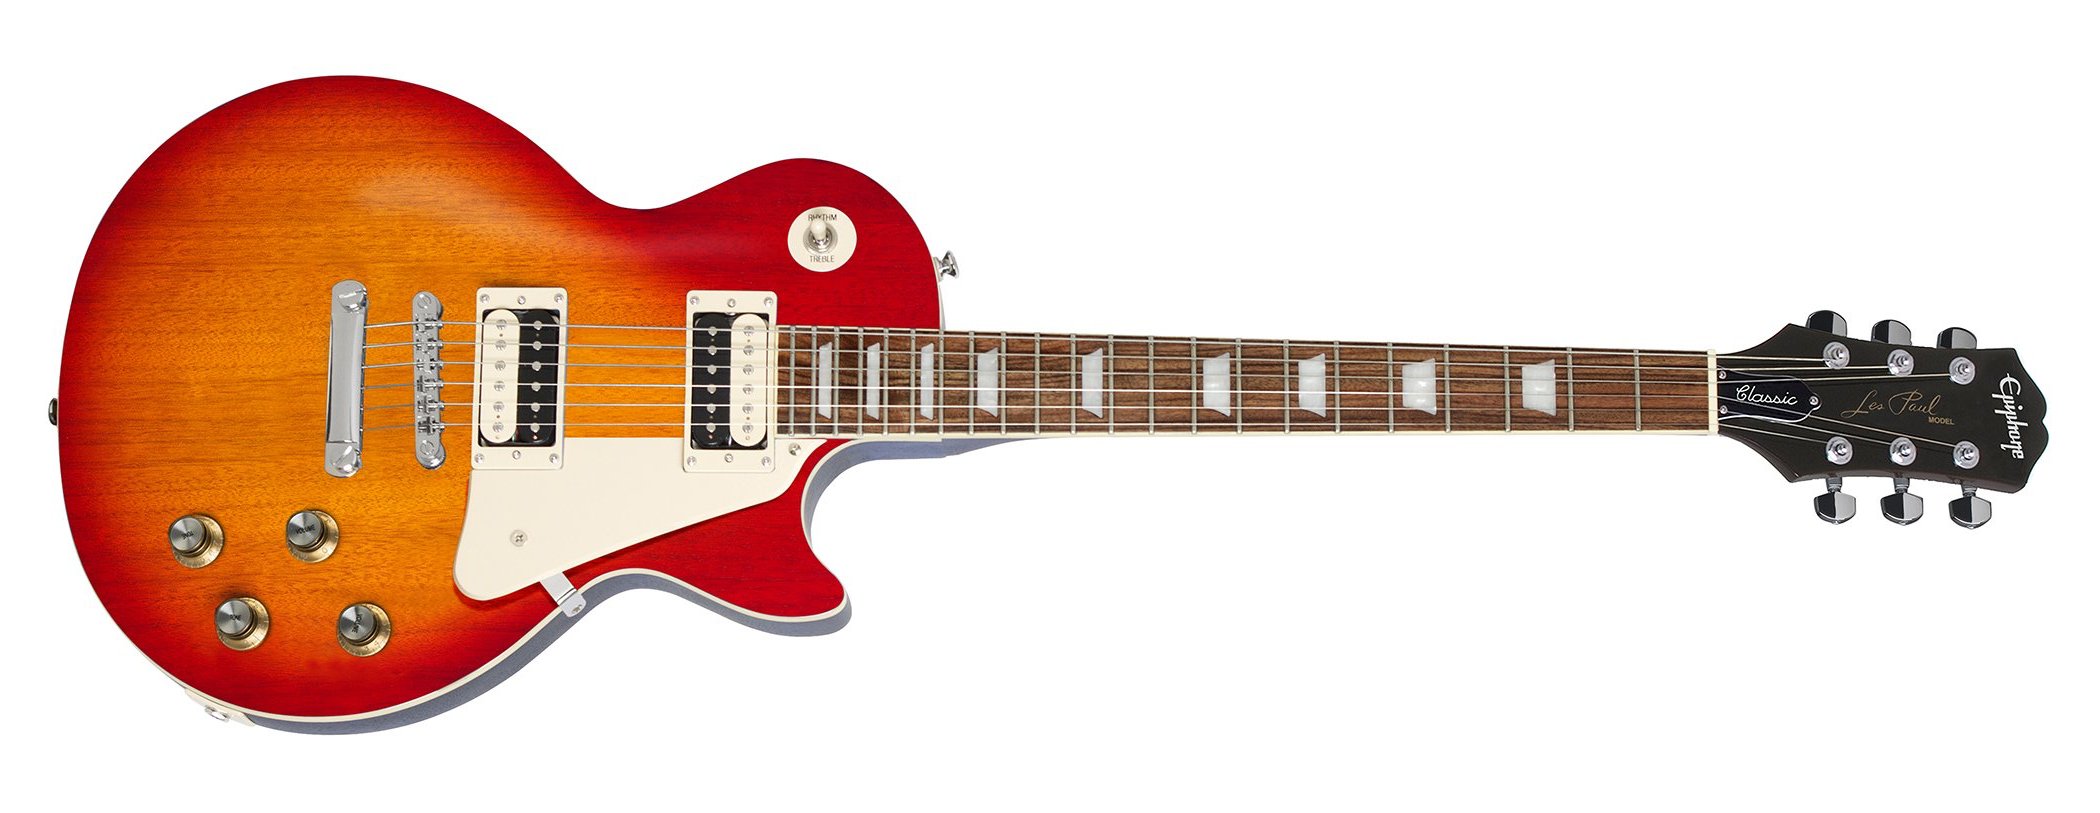 Epiphone Inspired by Gibson Modern Collection Epi Les Paul Classic – Worn Heritage Cherry Sunburst ELCSWSNH